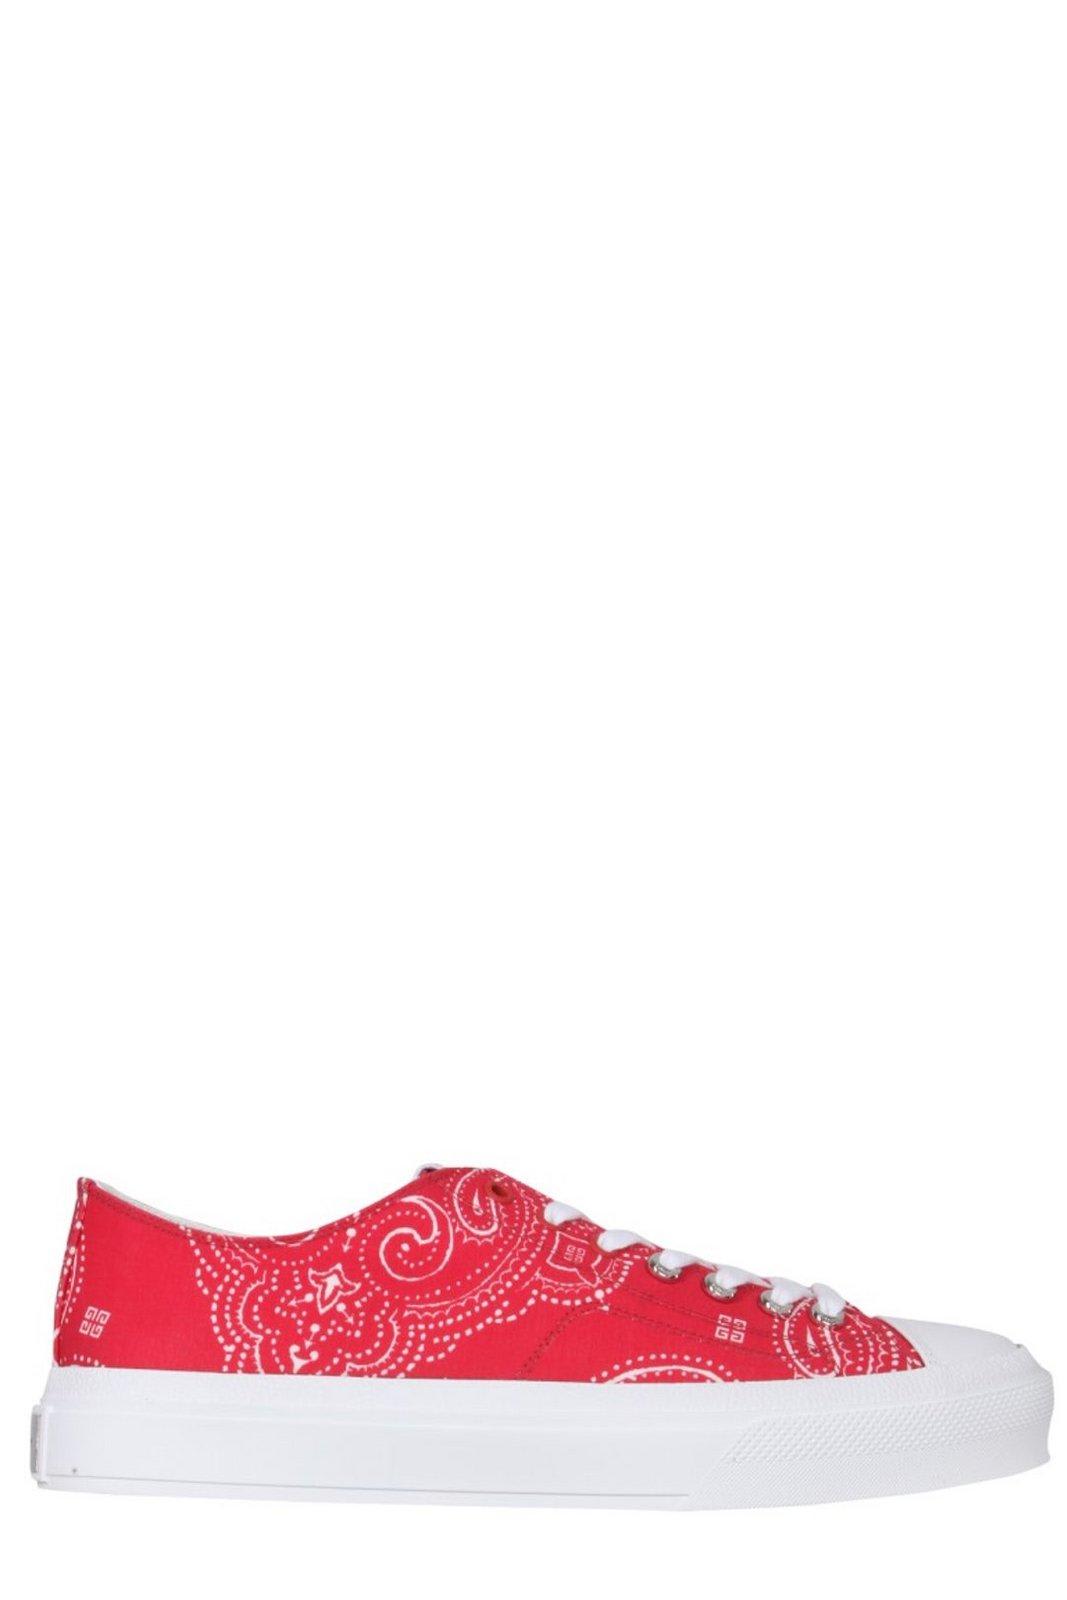 Shop Givenchy Bandana Printed City Sneakers In Red